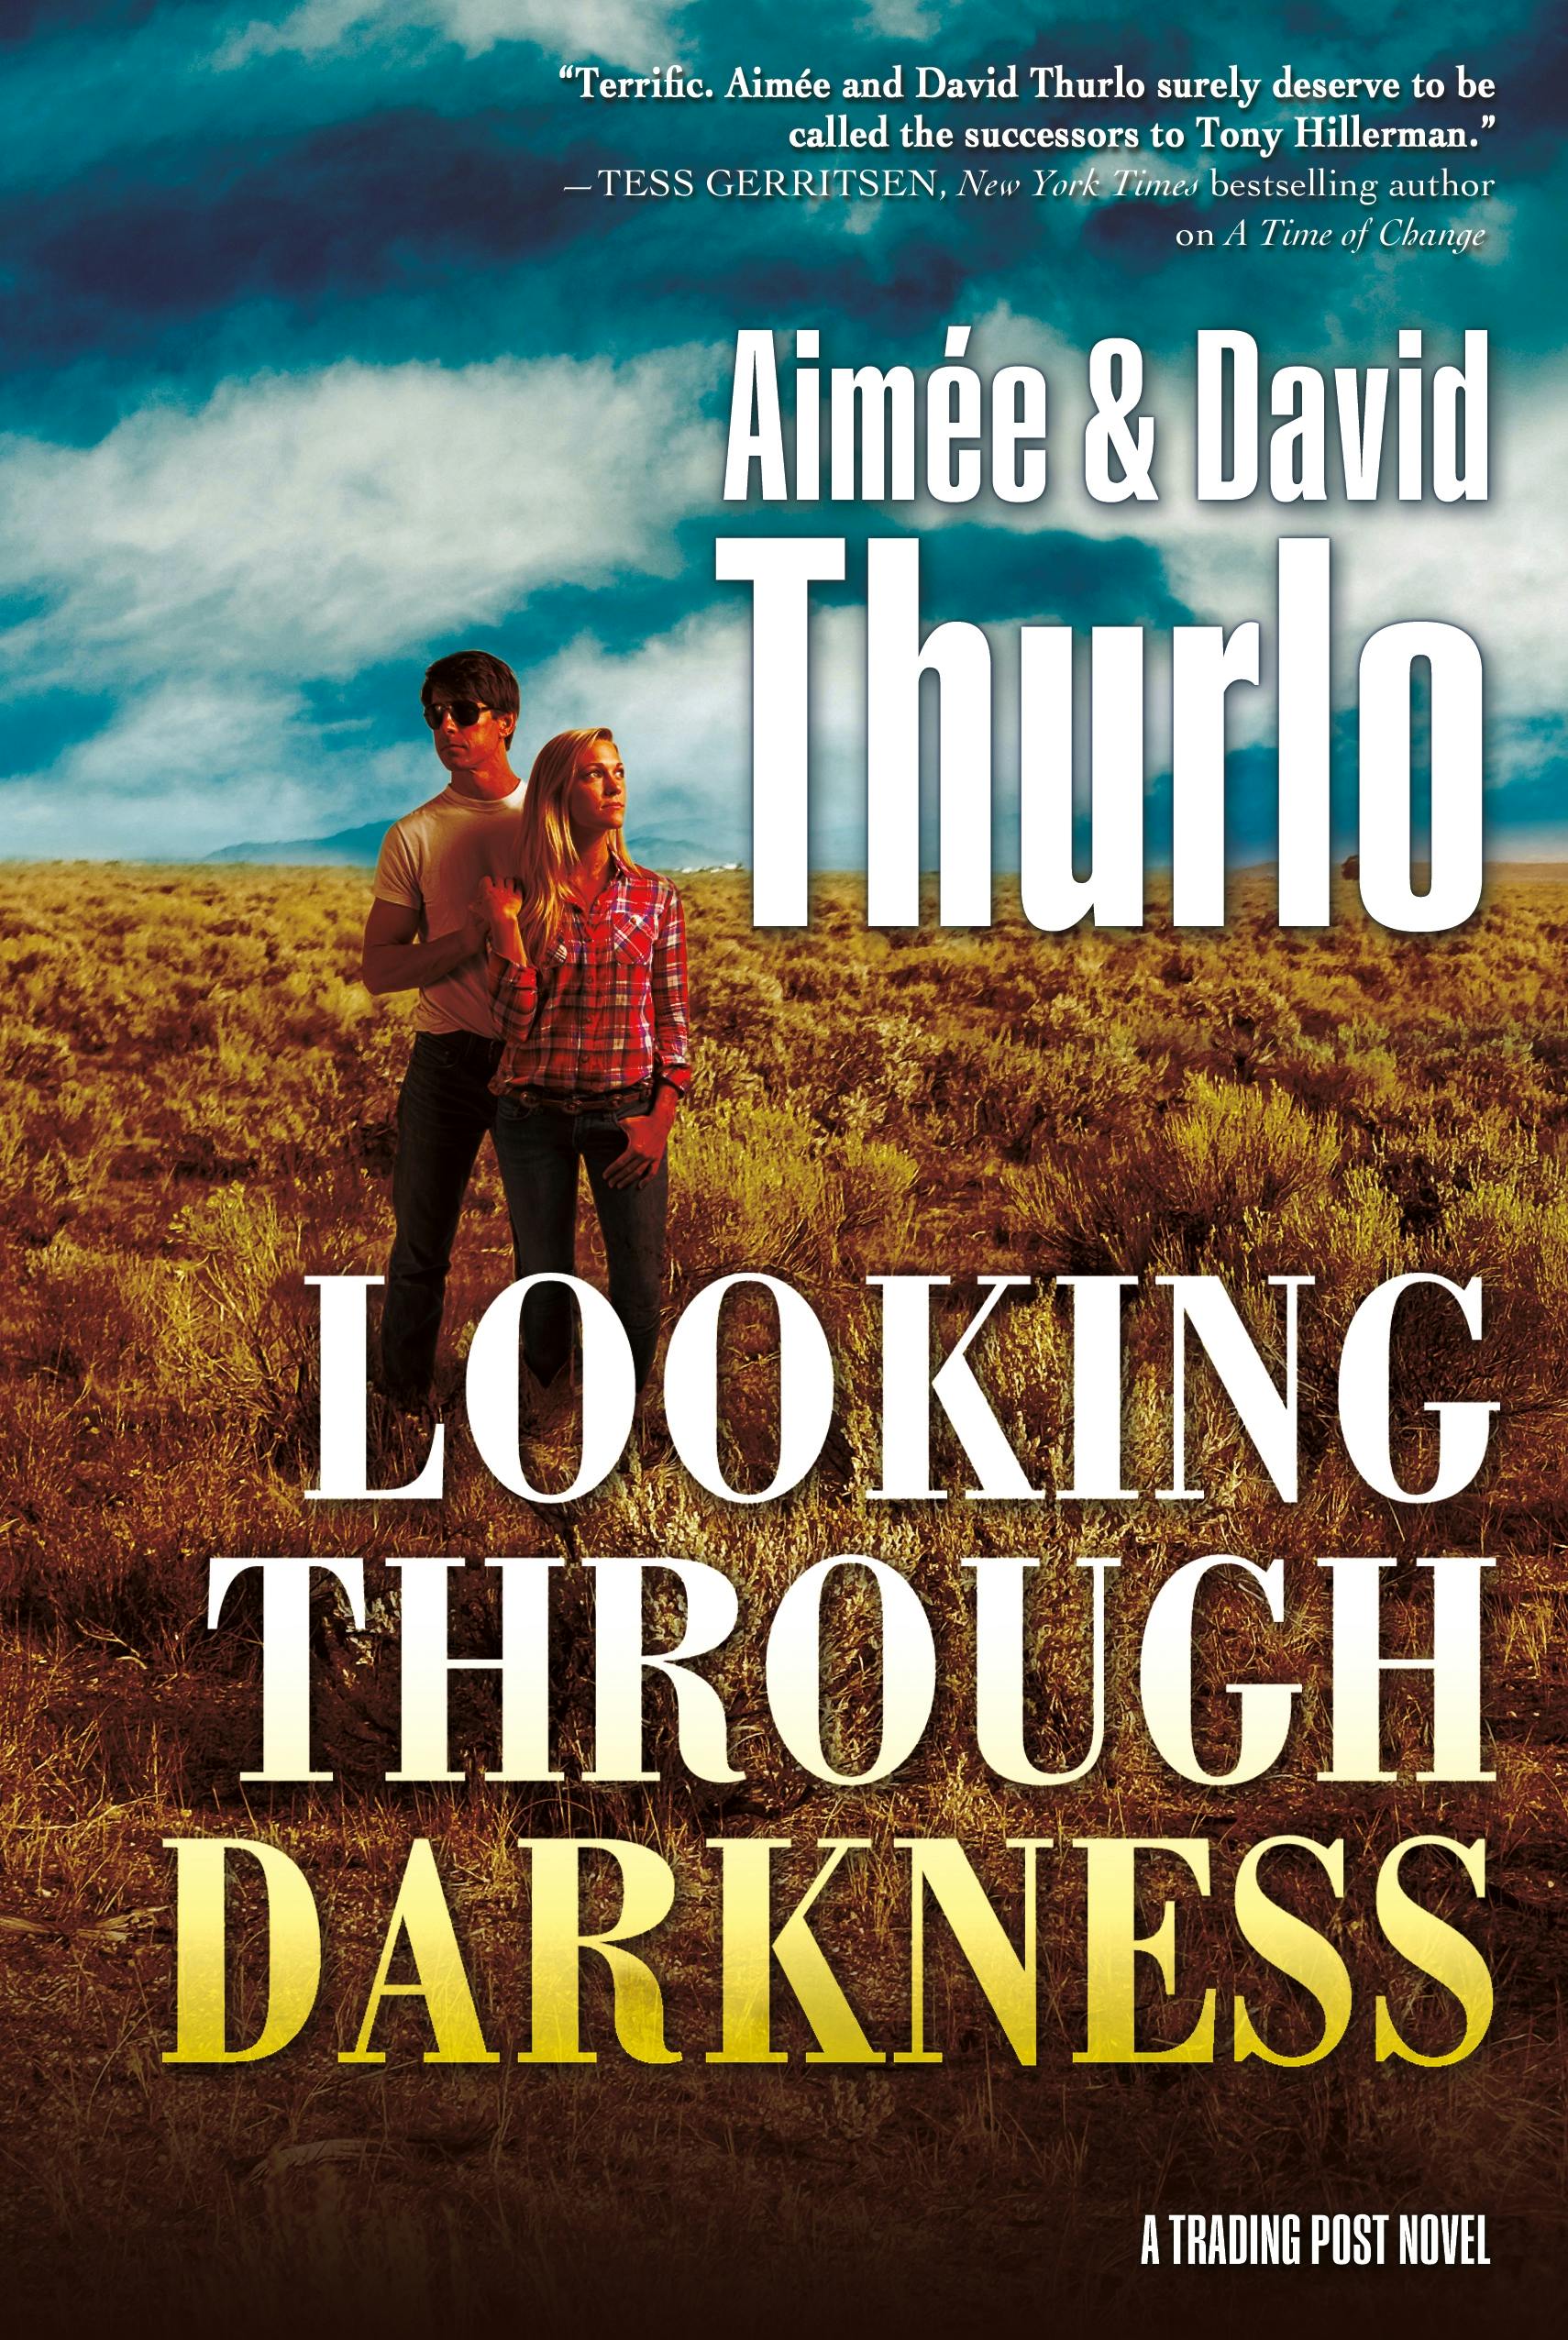 Cover for the book titled as: Looking Through Darkness